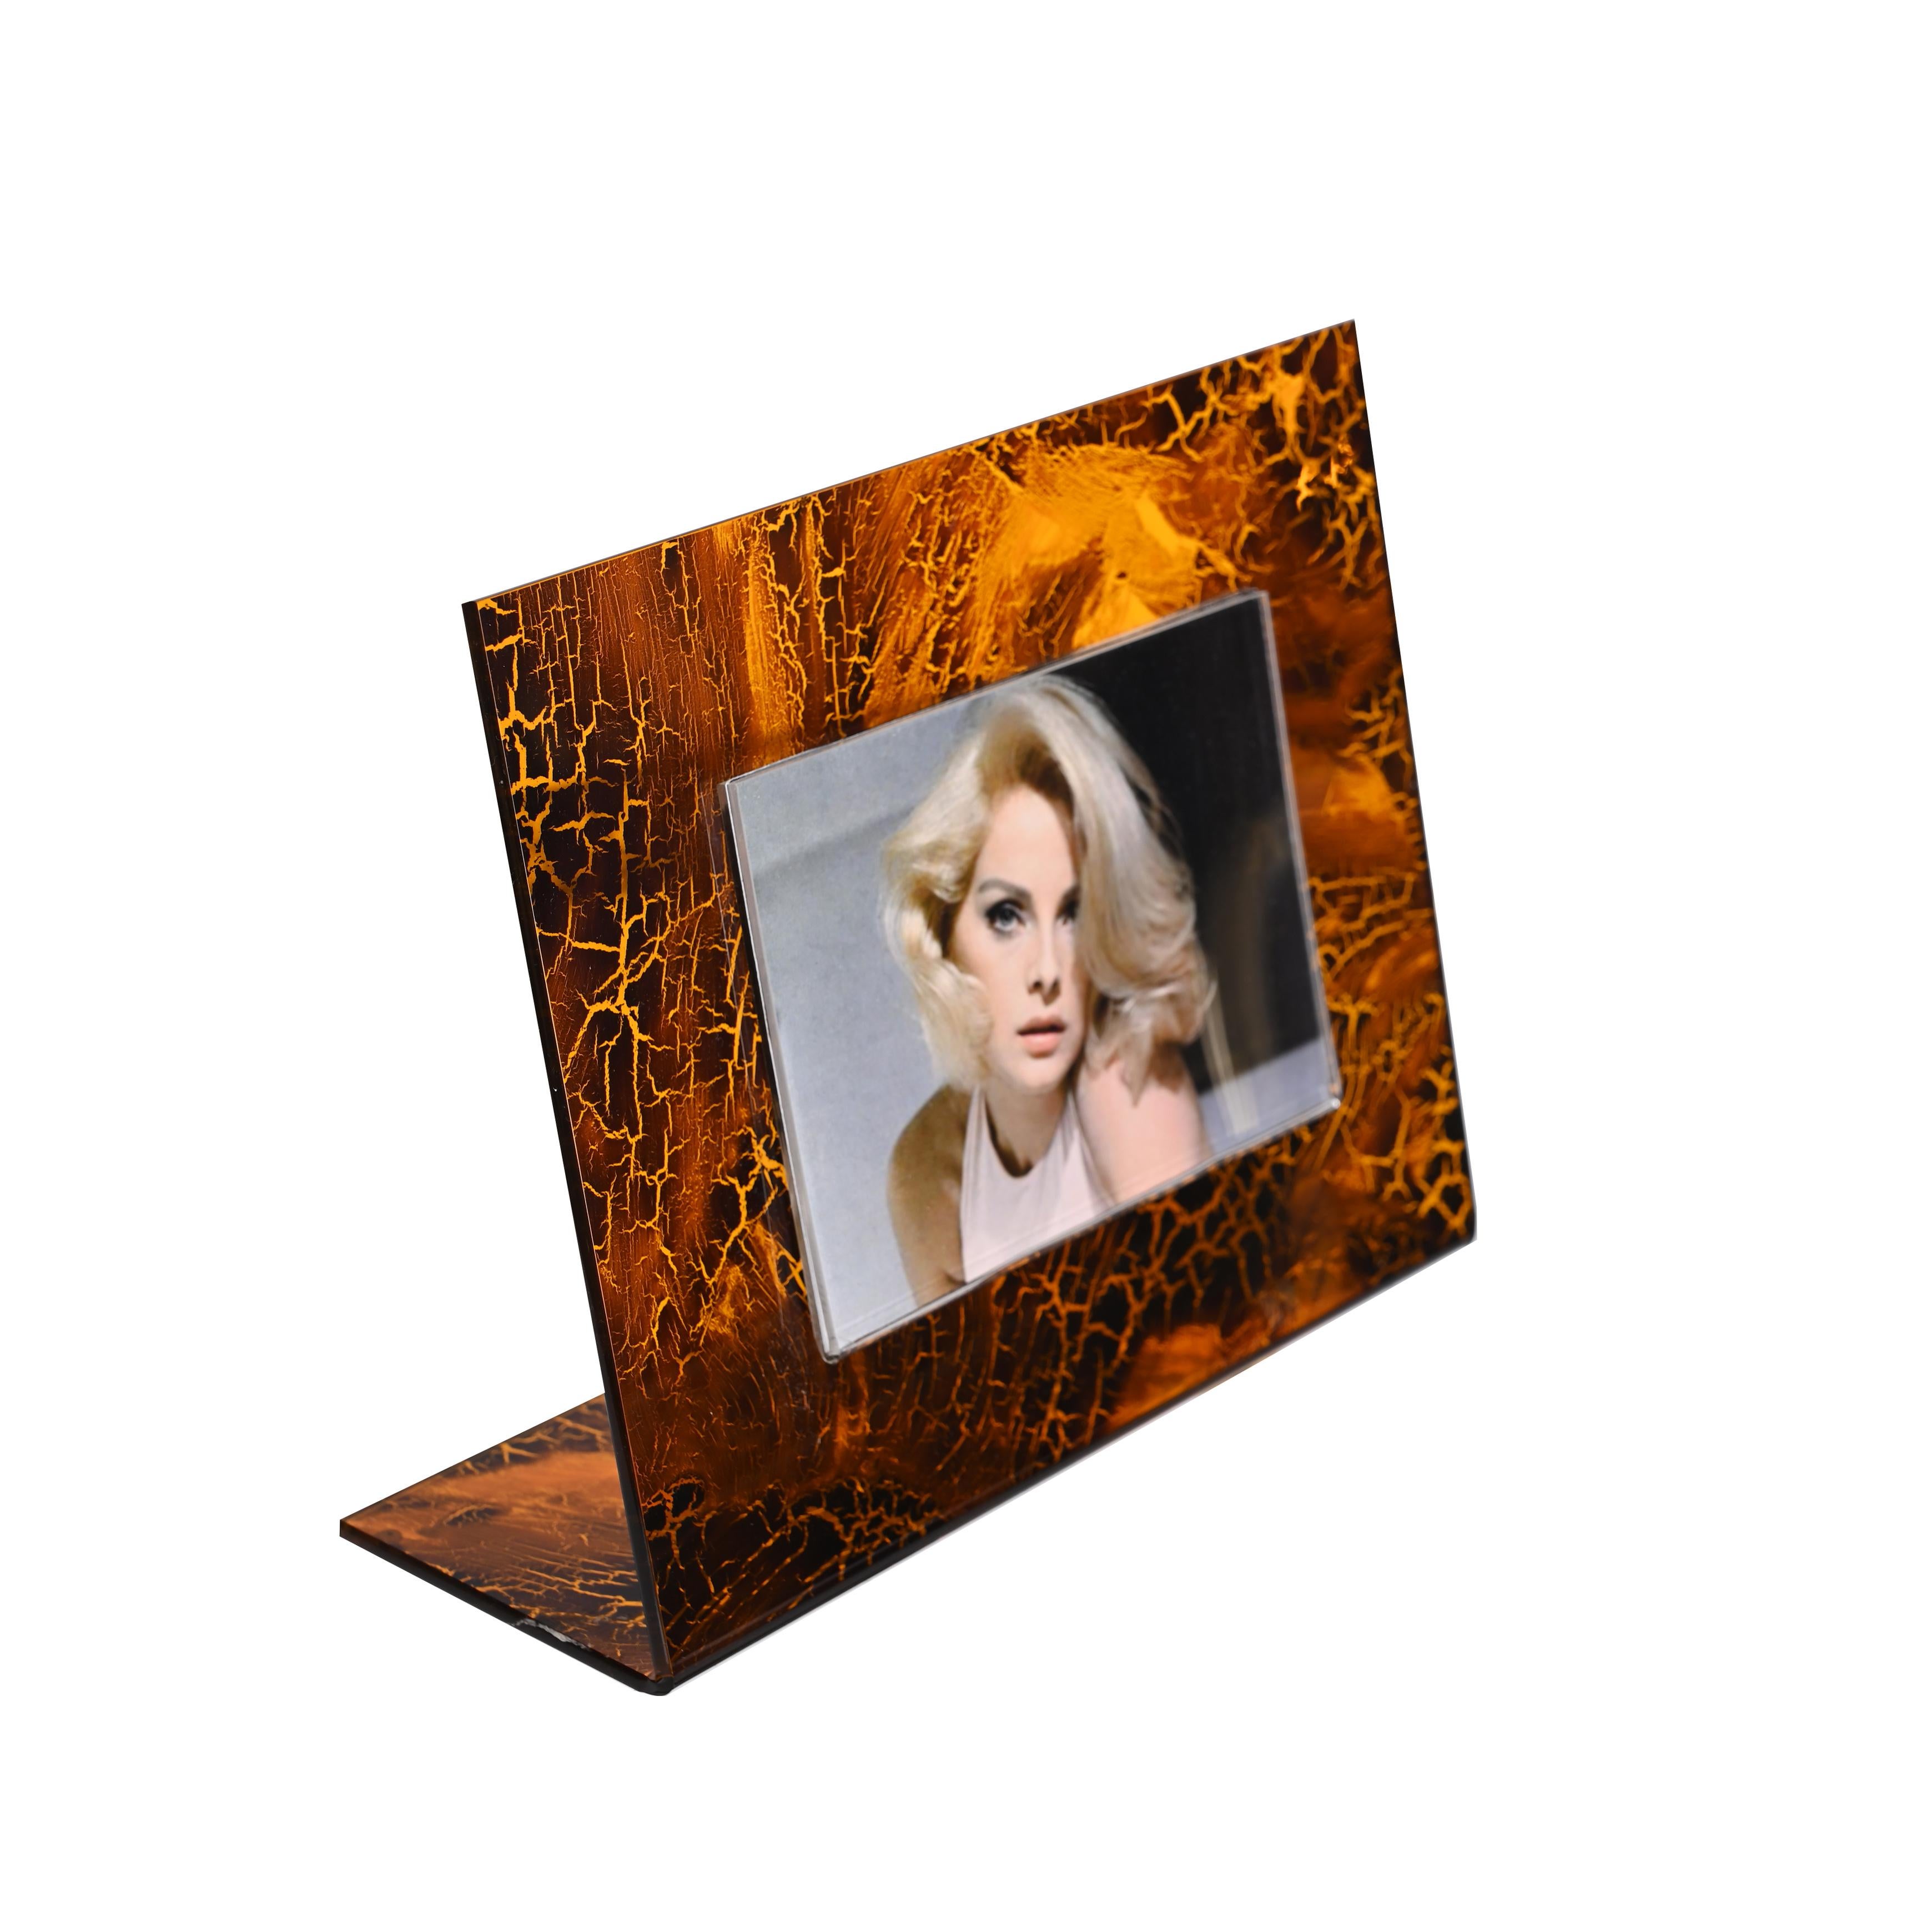 Gabriella Crespi Style Photo Frame in Lucite Tortoiseshell, Italy, 1970s For Sale 2